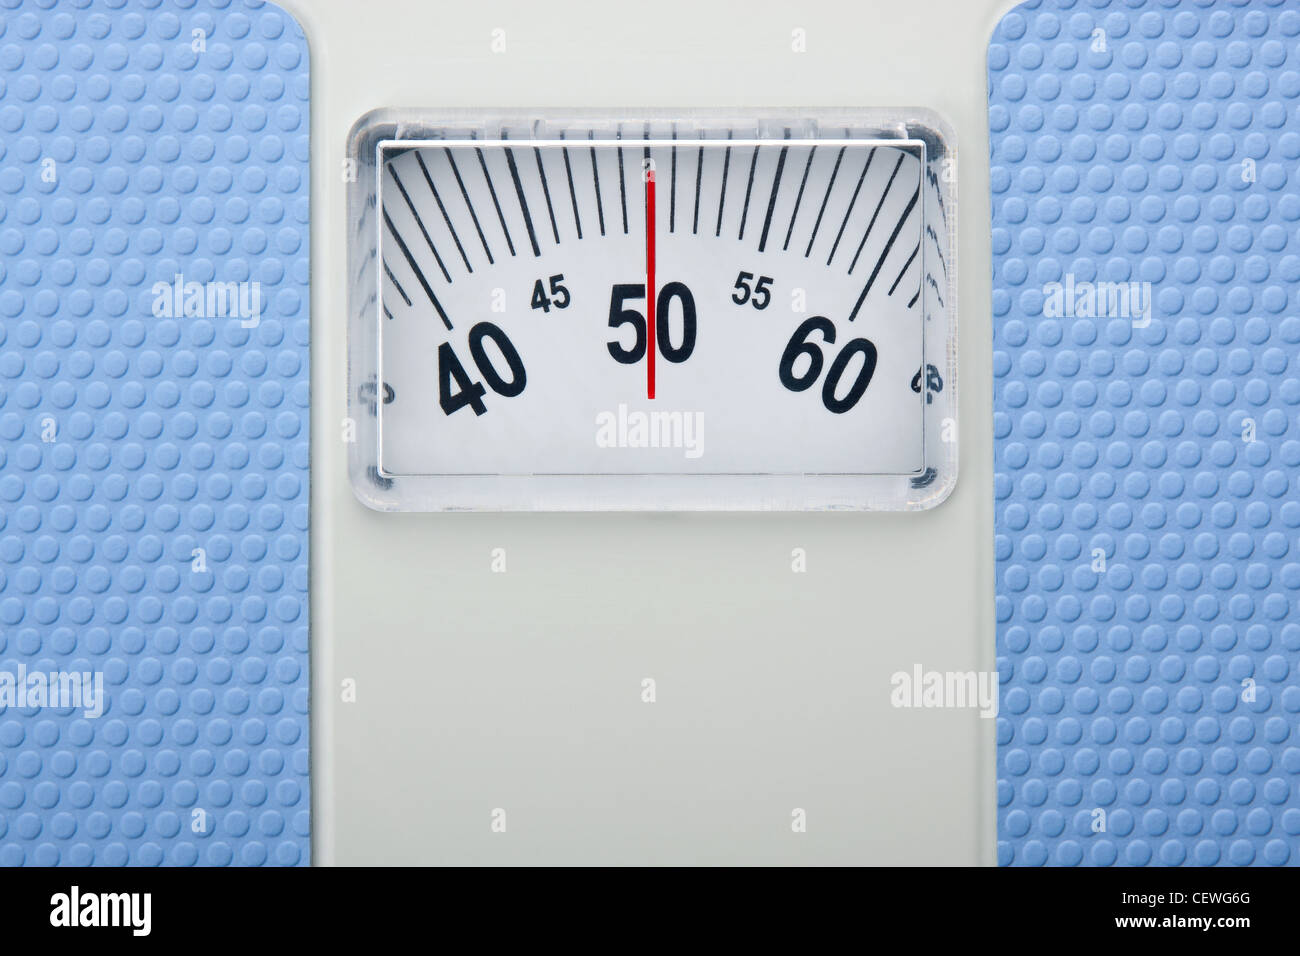 Bathroom scales isolated against a white background Stock Photo